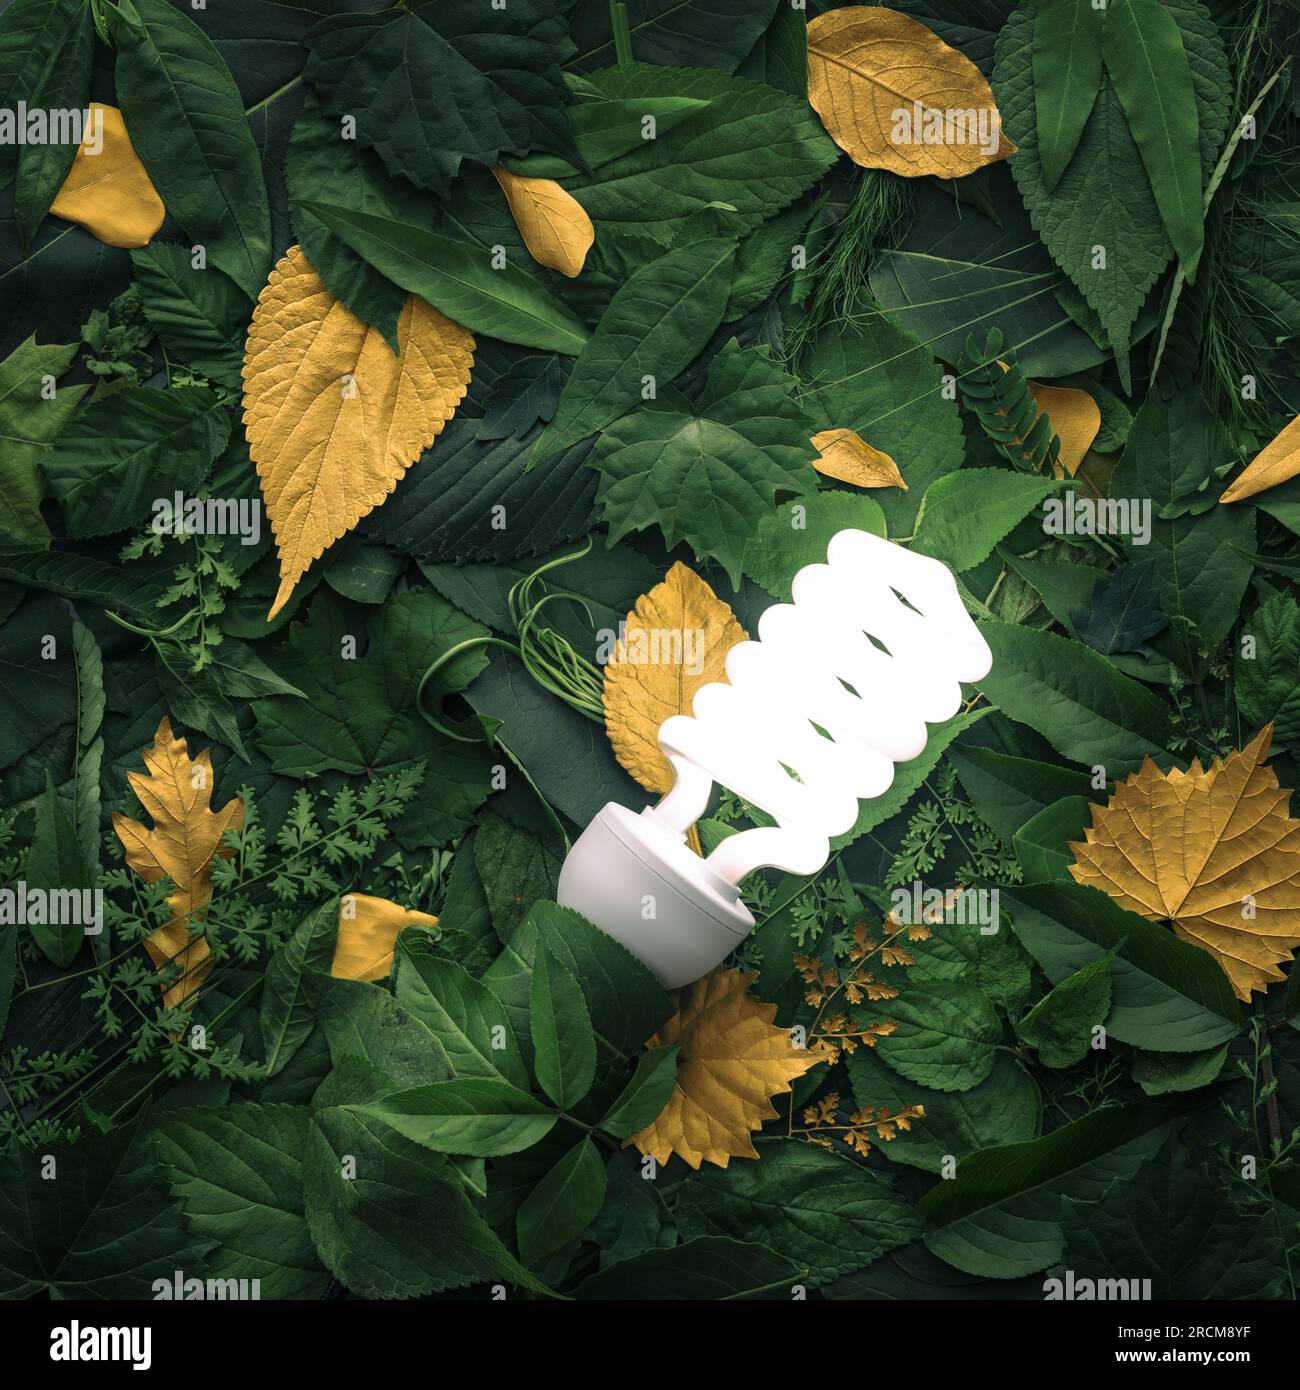 Vibrant green foliage with gold leaves lit by energy efficient lightbulb. Concept of environmentally friendly ideas, energy efficiency, or eco friendl Stock Photo